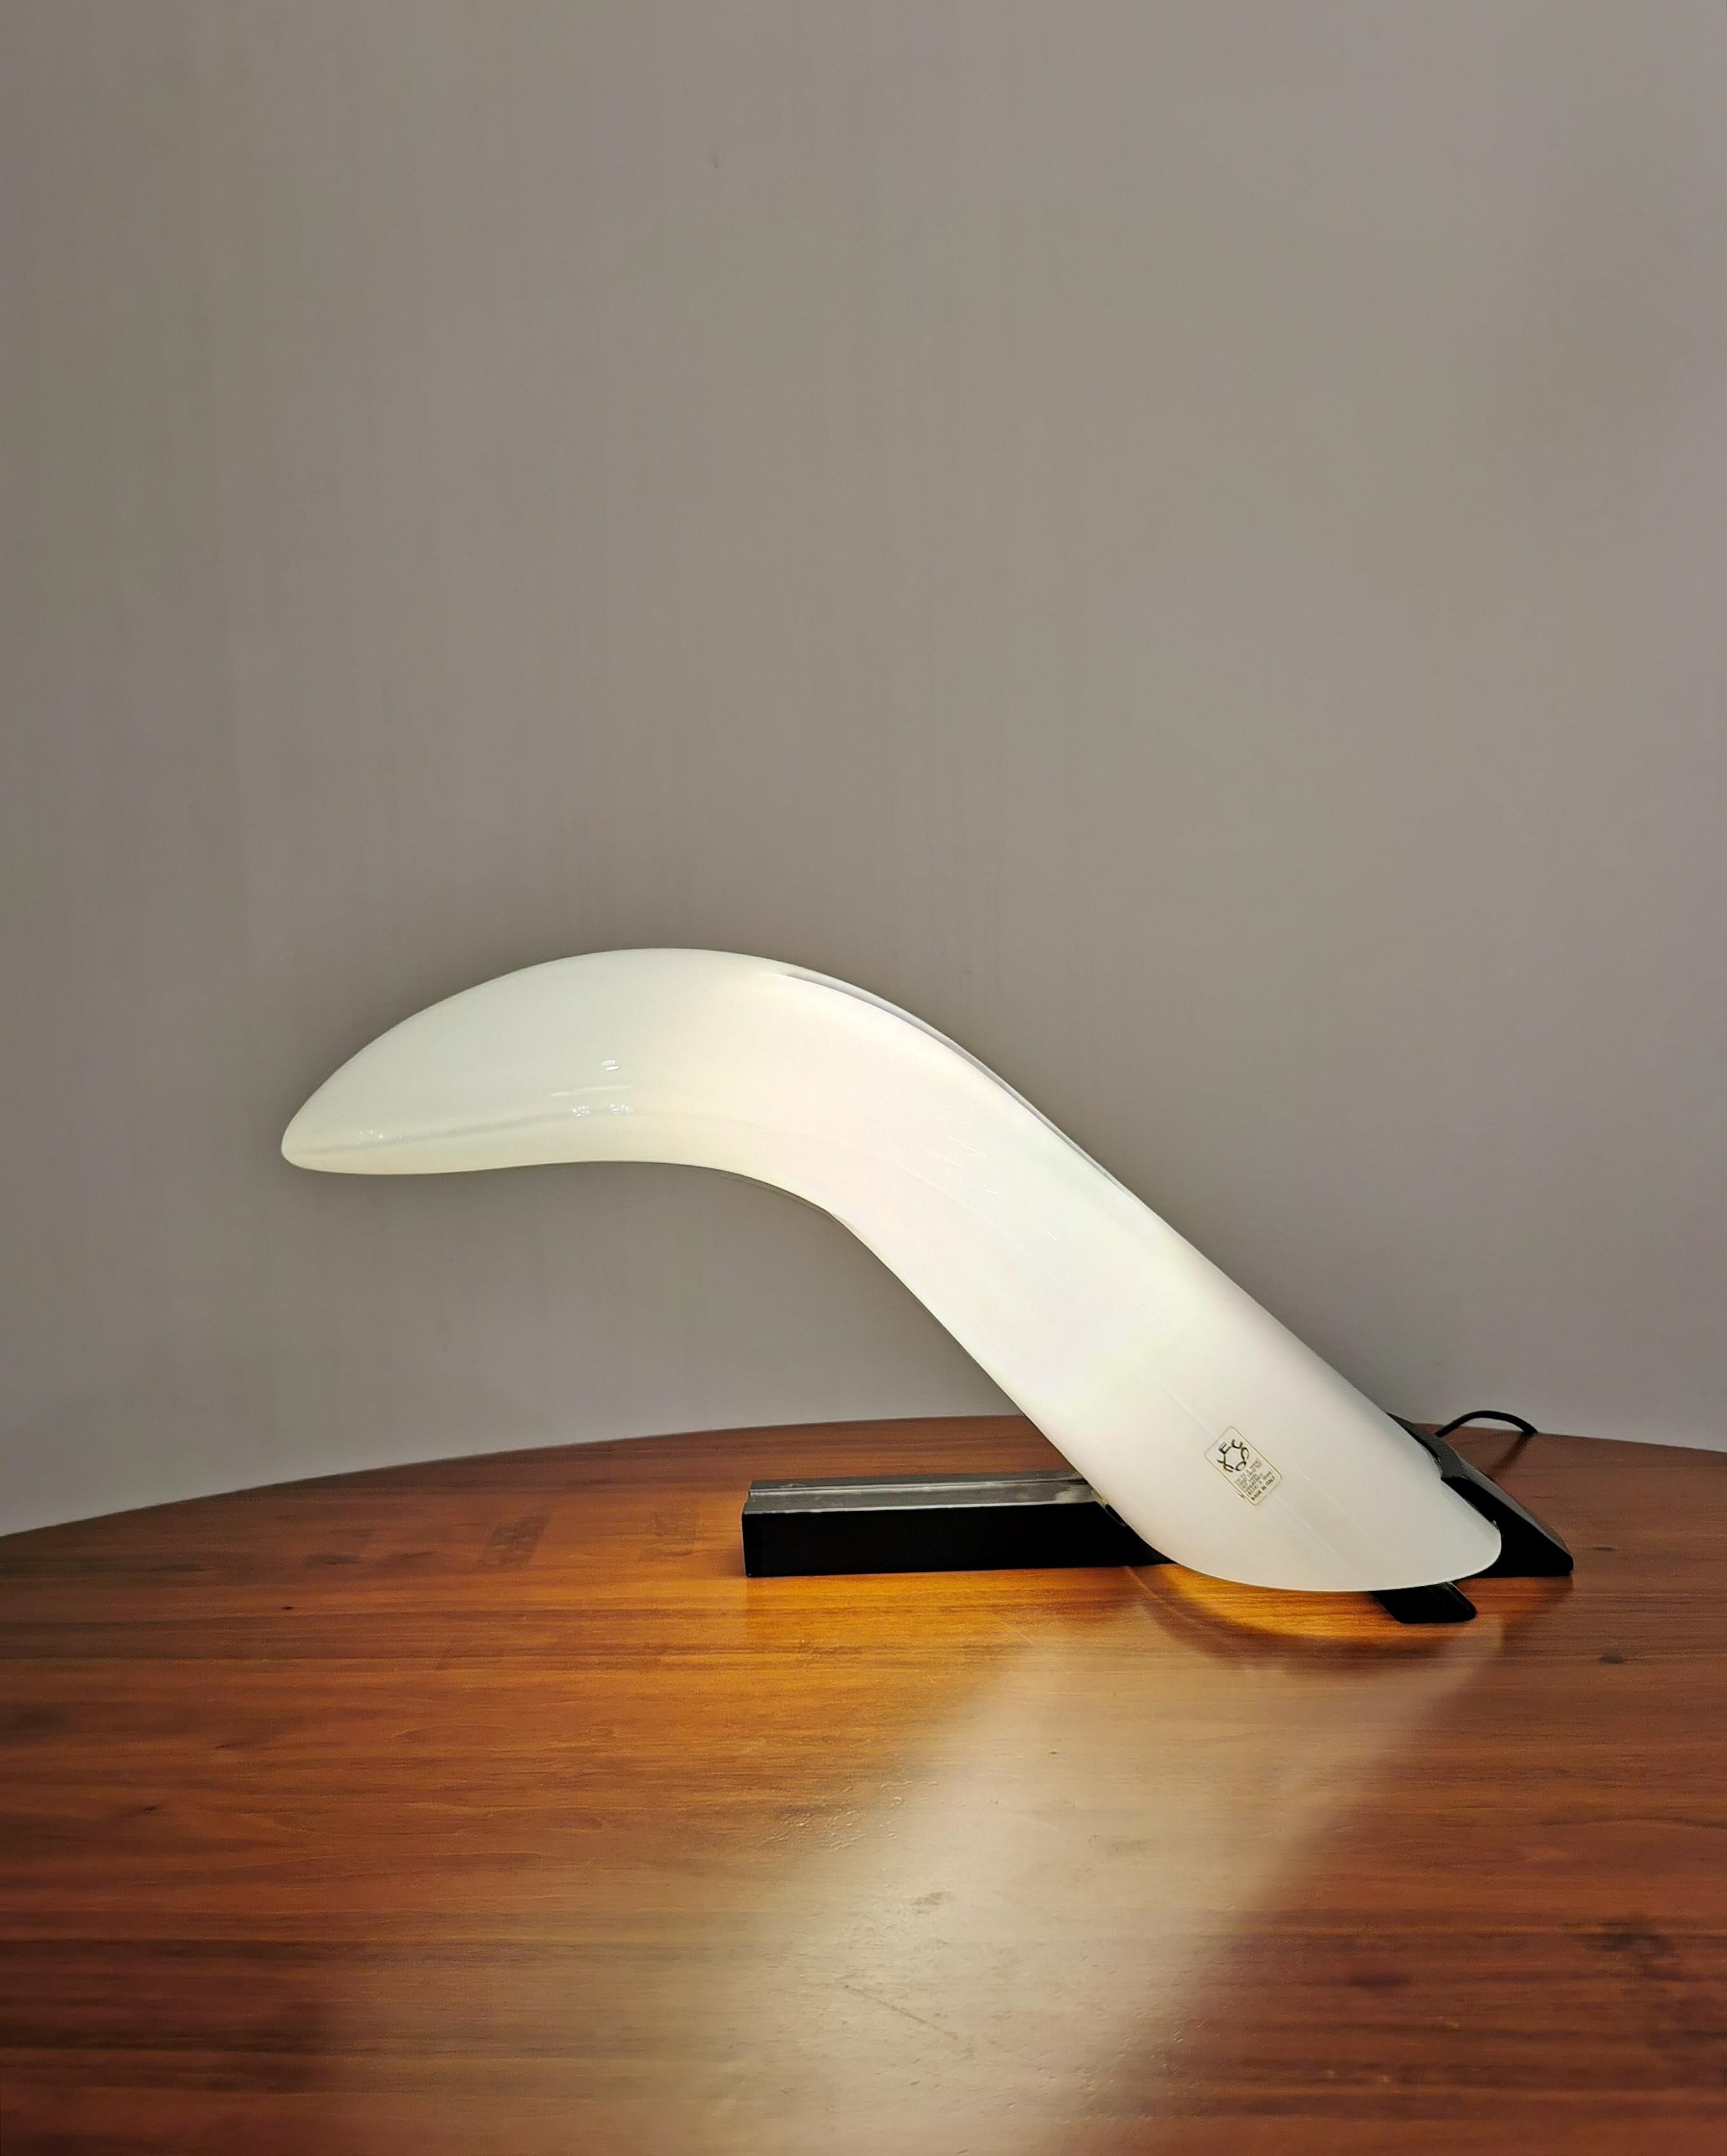  Table Desk Lamp Leucos Murano Glass Midcentury Modern Italian Design 1980s In Good Condition For Sale In Palermo, IT